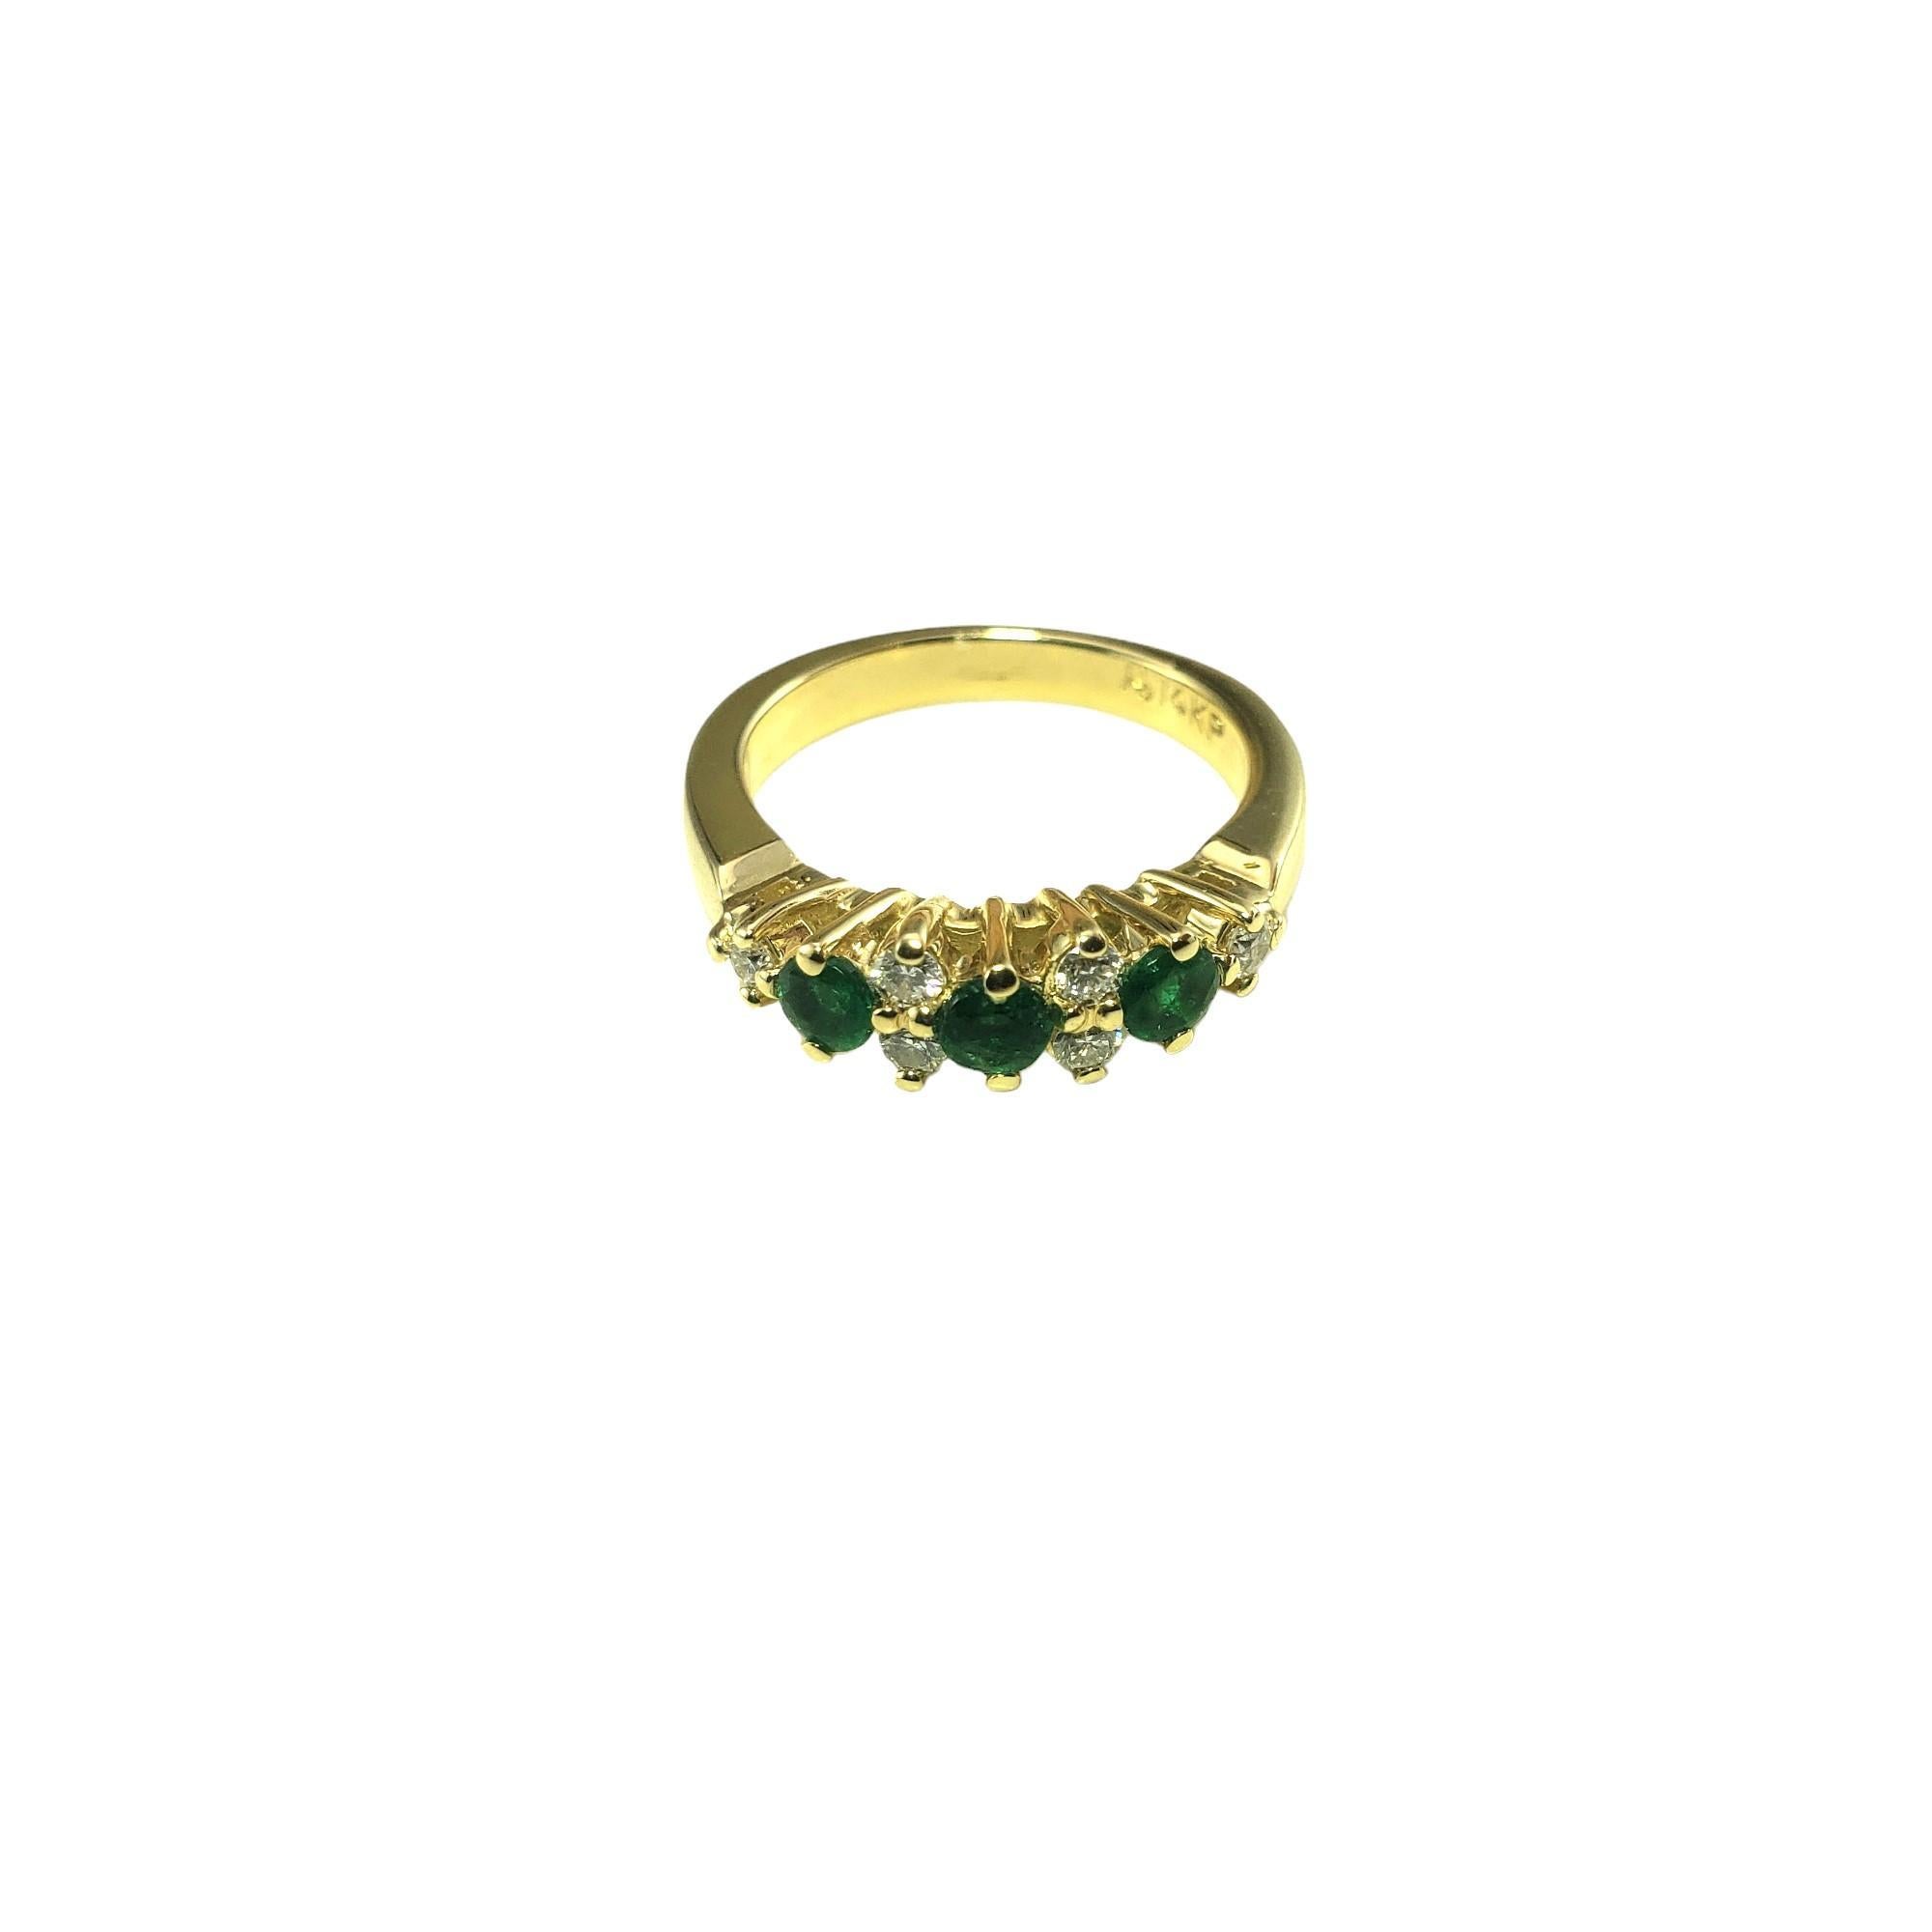 Vintage 14K Yellow Gold Emerald and Diamond Ring Size 6.5 JAGi Certified-

This stunning ring features three round natural emeralds (3.3 mm) and six round brilliant cut diamonds set in classic 14K yellow gold.  Width: 6 mm.  Shank: 3 mm.

Total